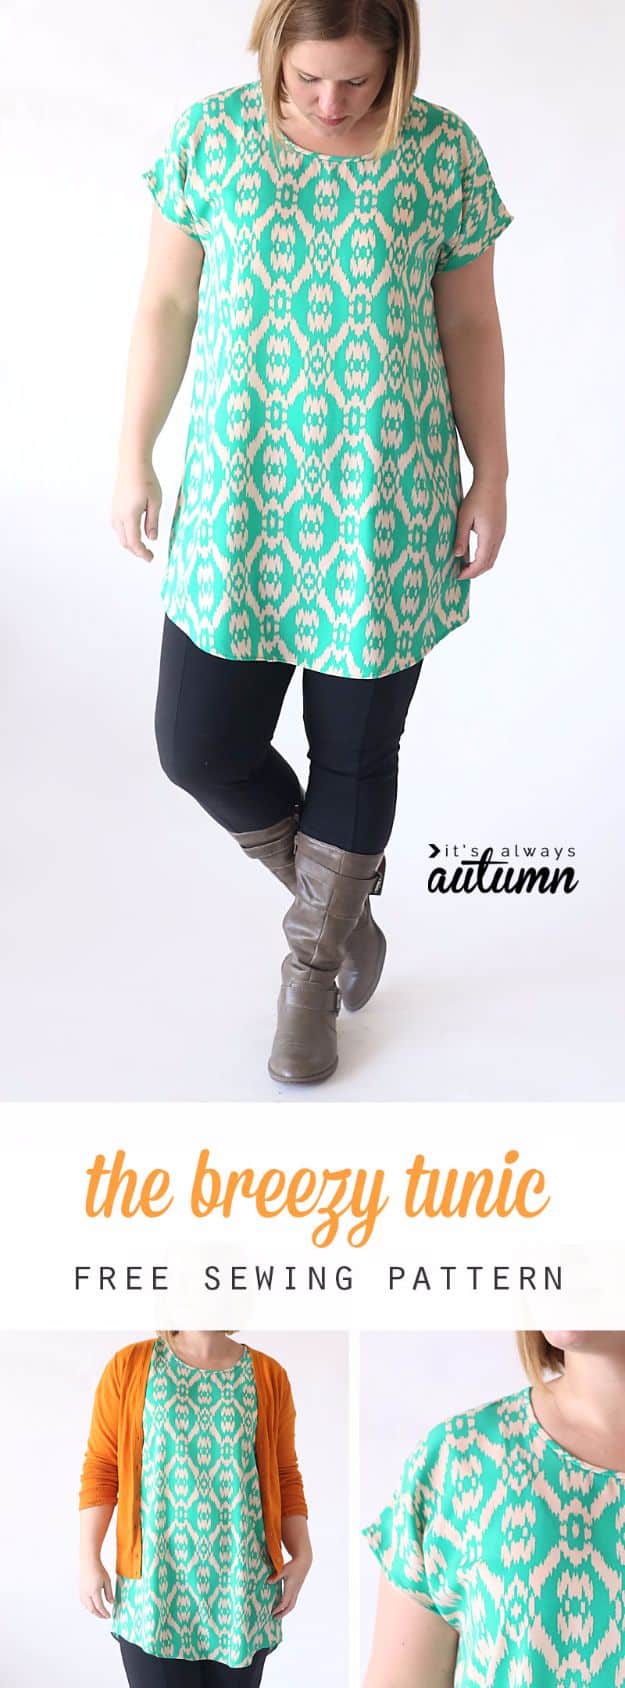 DIY Fashion for Spring - Breezy Tee Tunic - Easy Homemade Clothing Tutorials and Things To Make To Wear - Cute Patterns and Projects for Women to Make, T-Shirts, Skirts, Dresses, Shorts and Ideas for Jeans and Pants - Tops, Tanks and Tees With Free Tutorial Ideas and Instructions http://diyjoy.com/fashion-for-spring